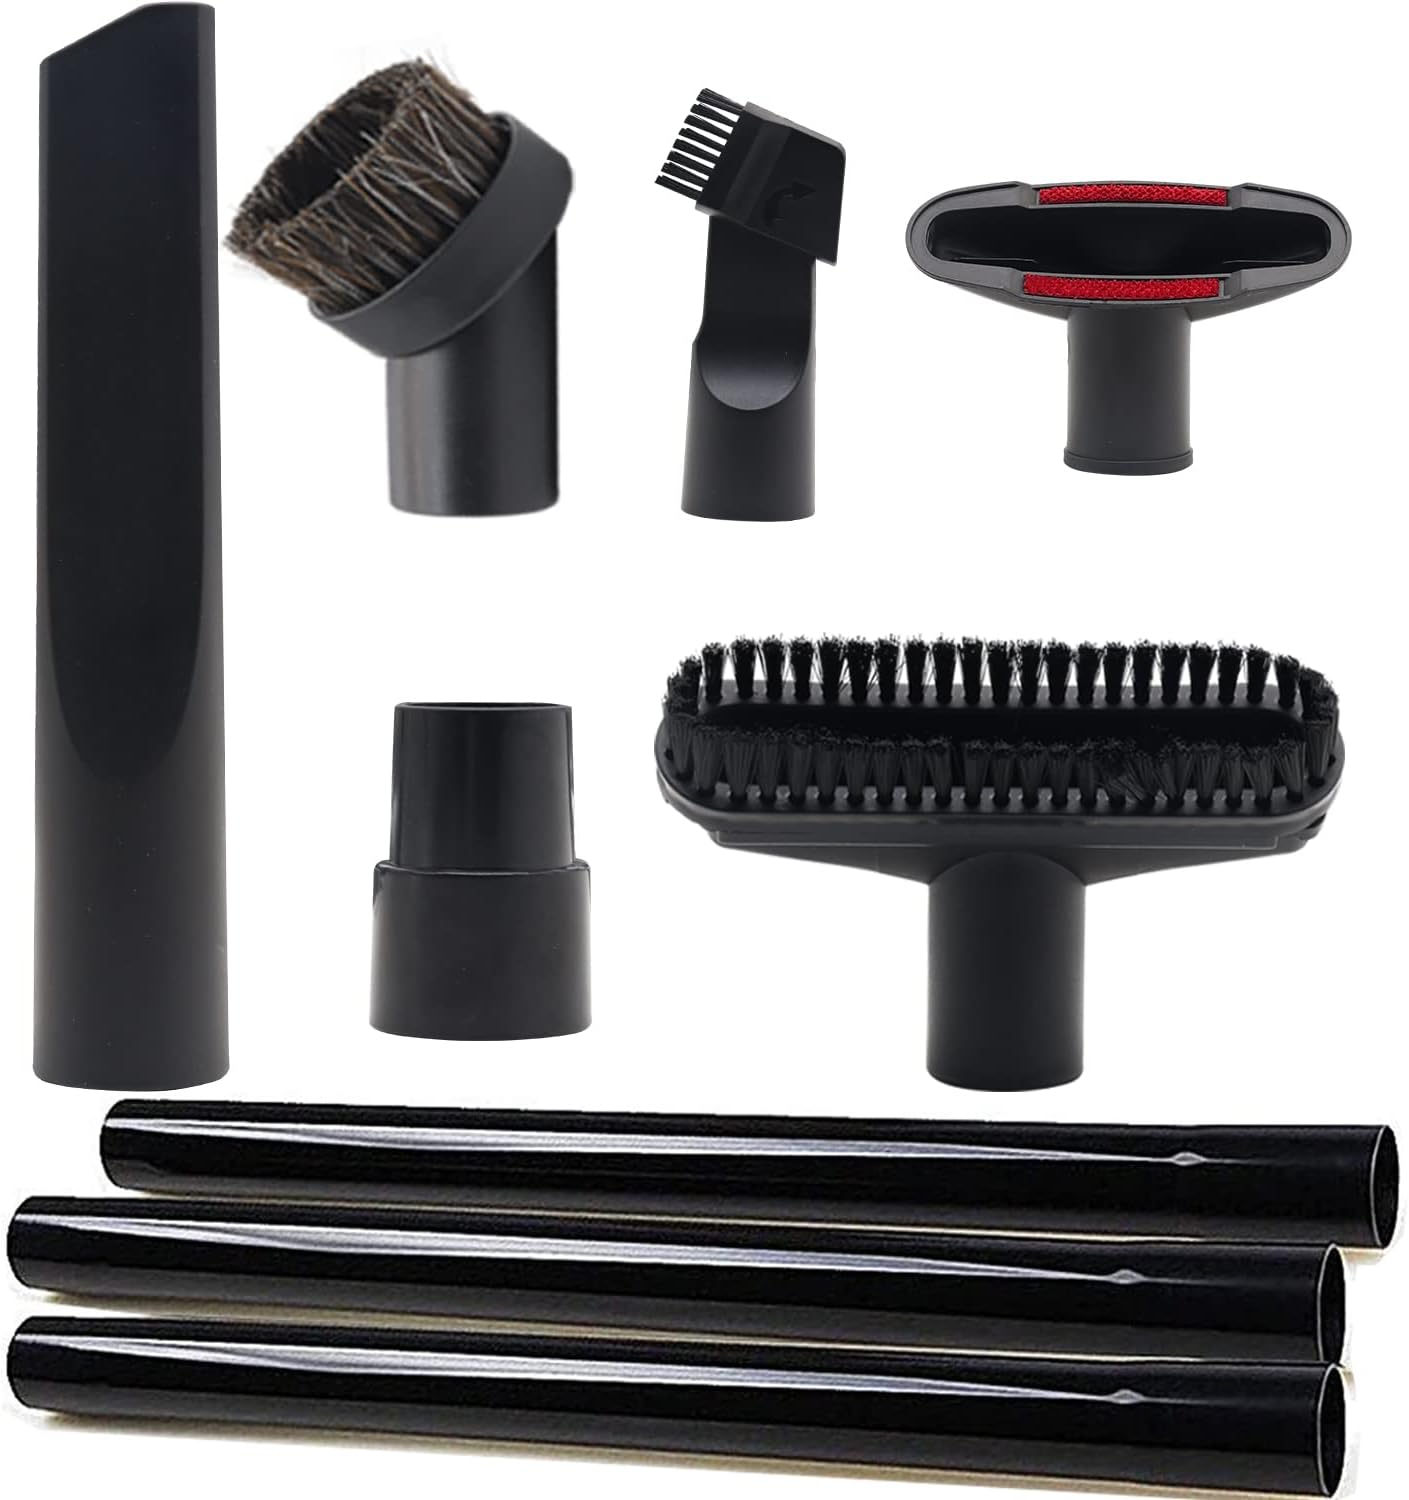 Details about   Black 39mm ID Vacuum Adapter Fittings 00214 for Shop Vacuum Accessories 